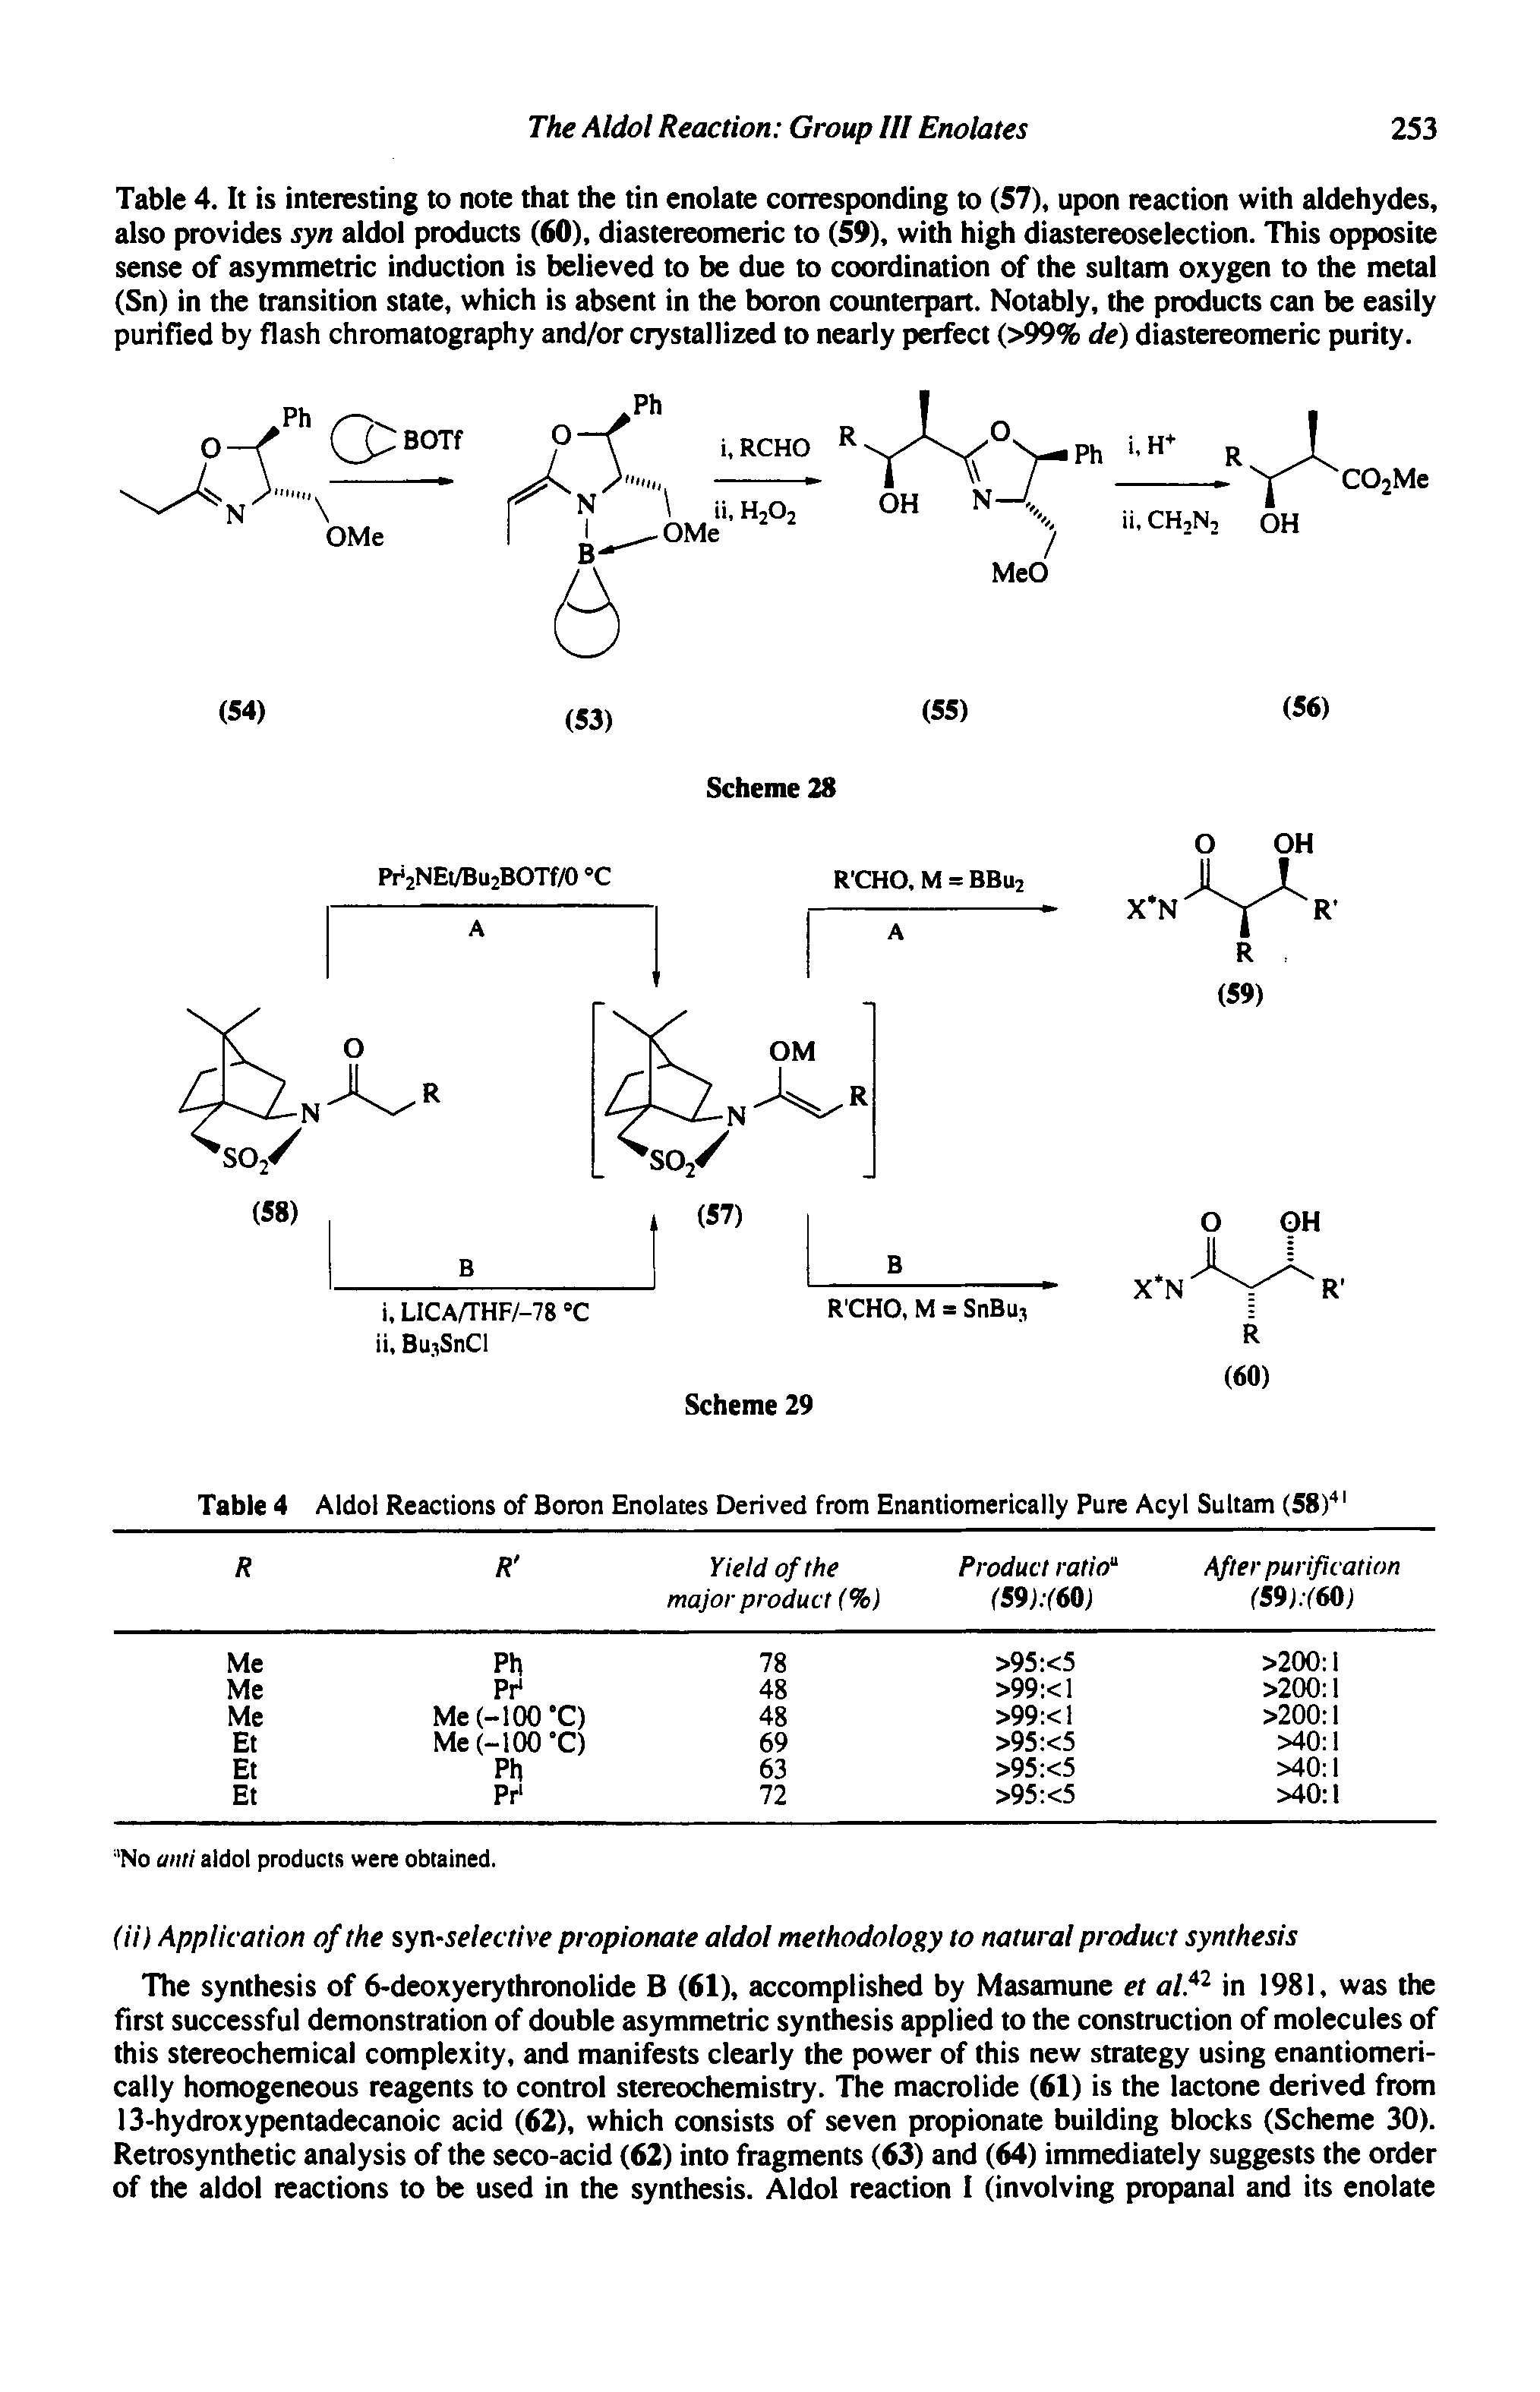 Table 4 Aldol Reactions of Boron Enolates Derived from Enantiomerically Pure Acyl Sultam (58) ...